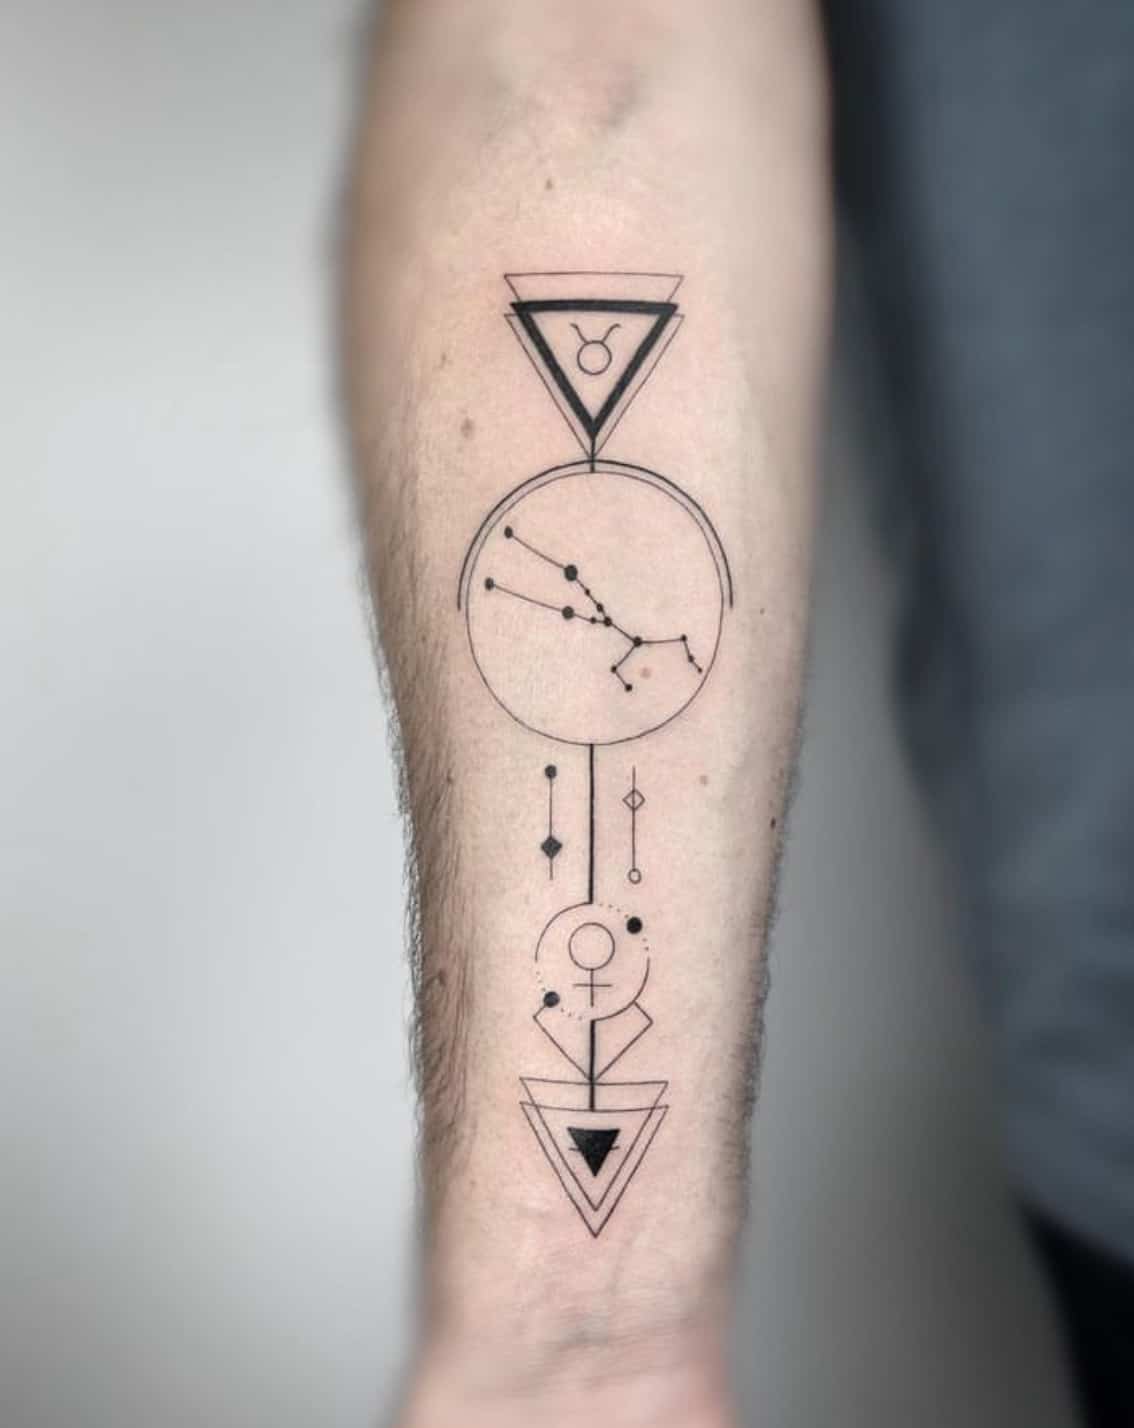 Rattle ink Tattoo -Virendra singh Rajawat - Taurus tattoos are heavily fill  in with meaning most of which stem from its Zodiac meaning. Taurus, as we  all know, is represented by the